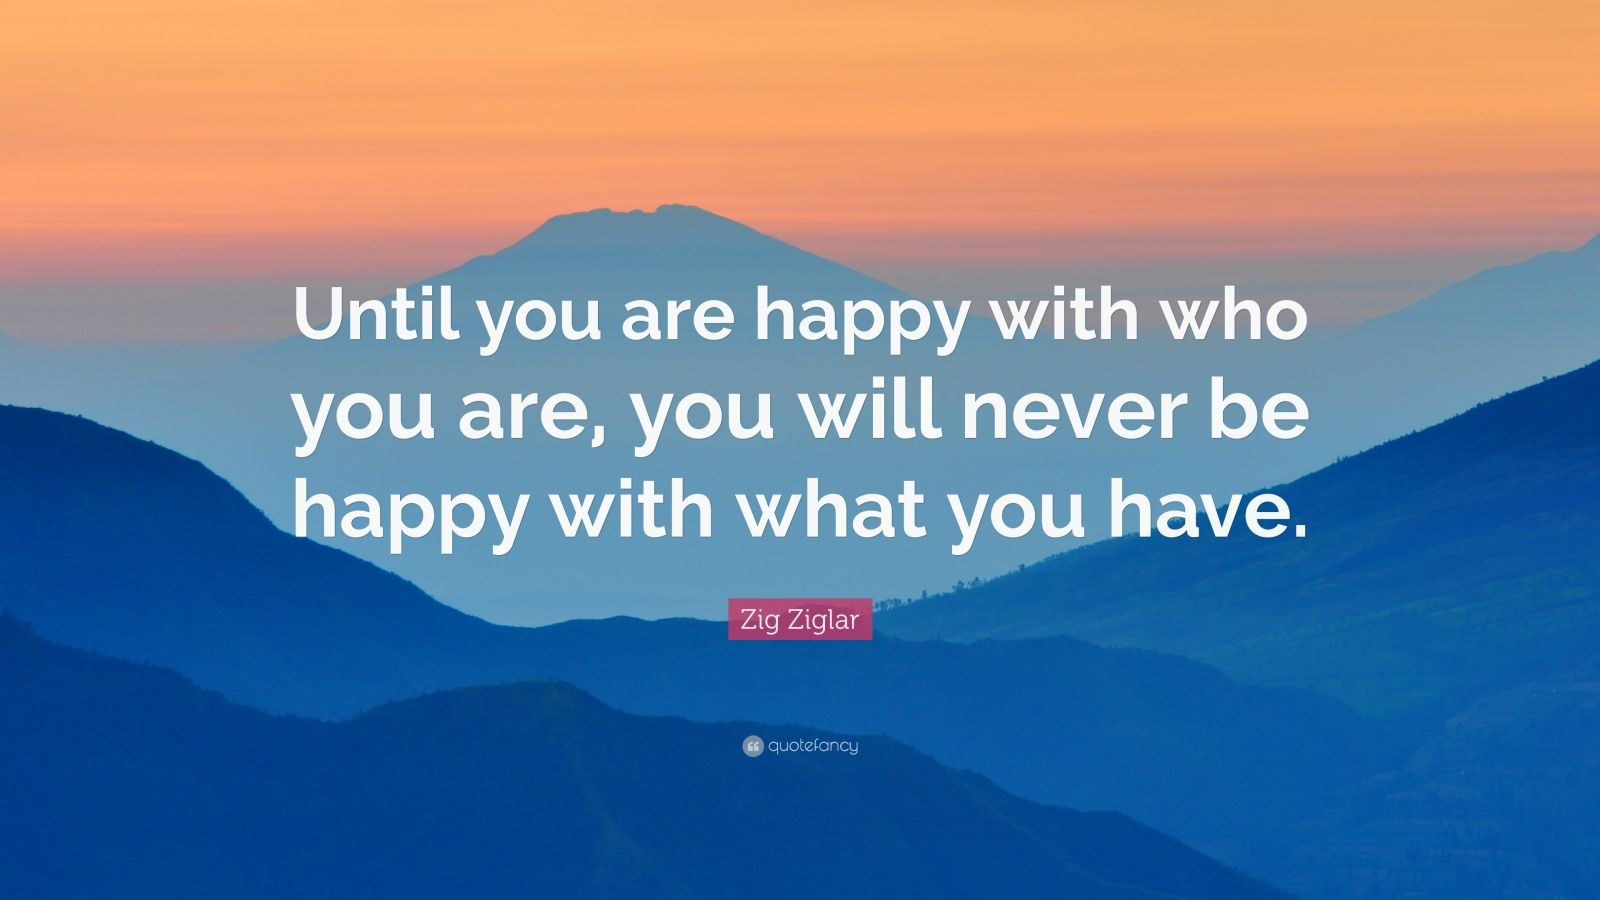 Zig Ziglar Quote: “Until you are happy with who you are, you will never ...